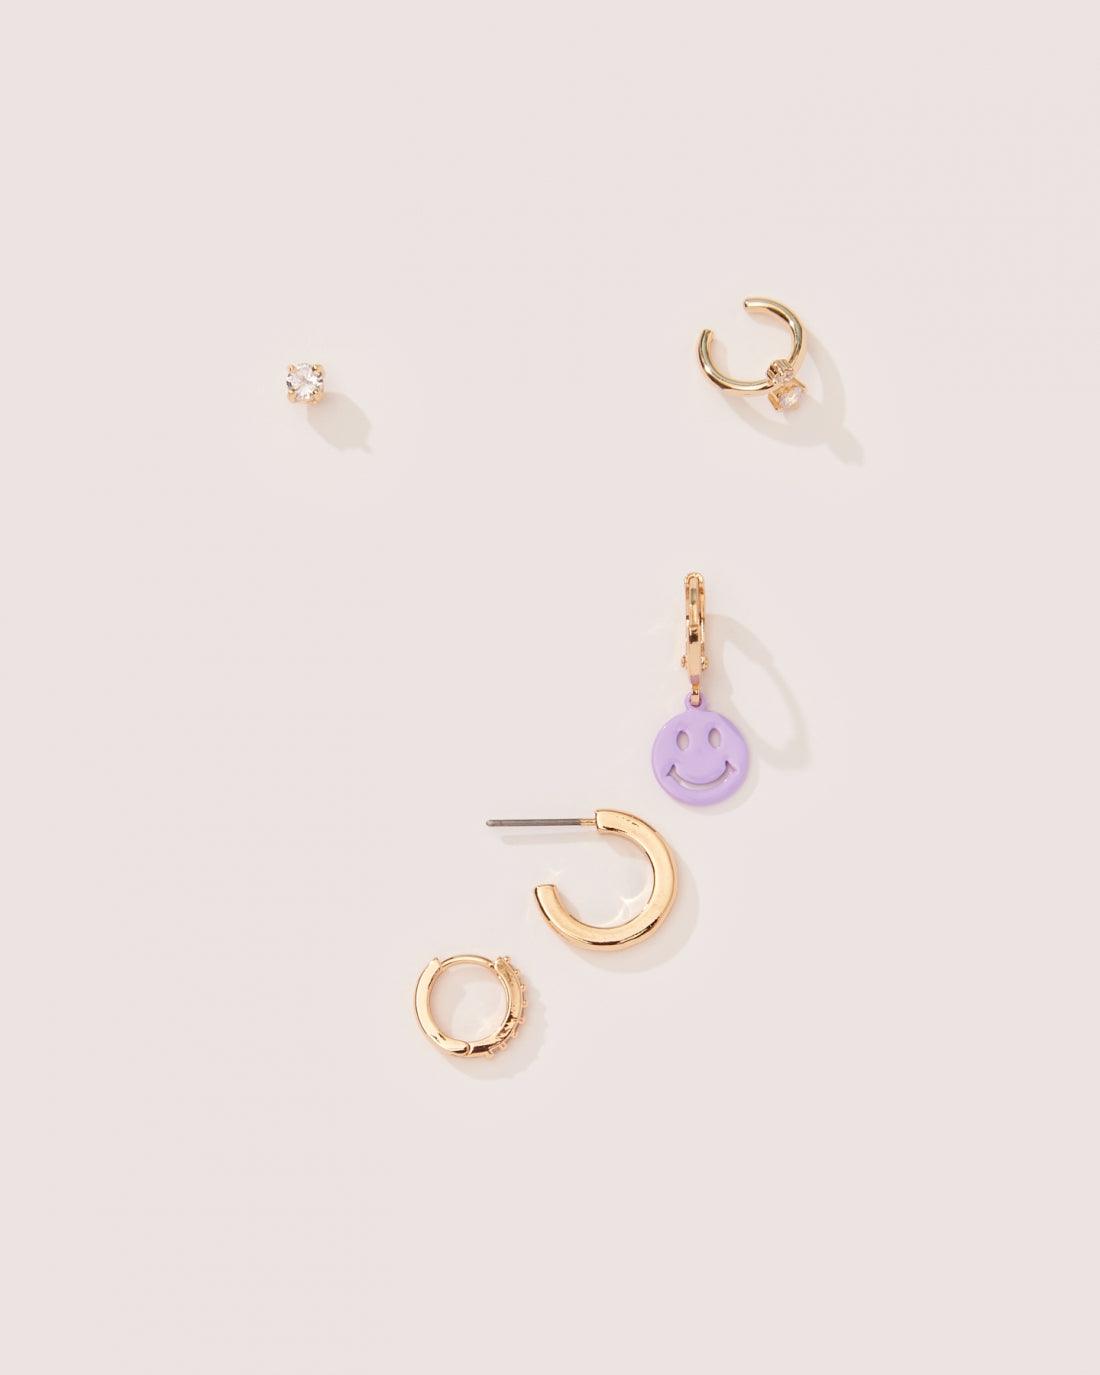 SMILEY EARRING SET - 8 Other Reasons